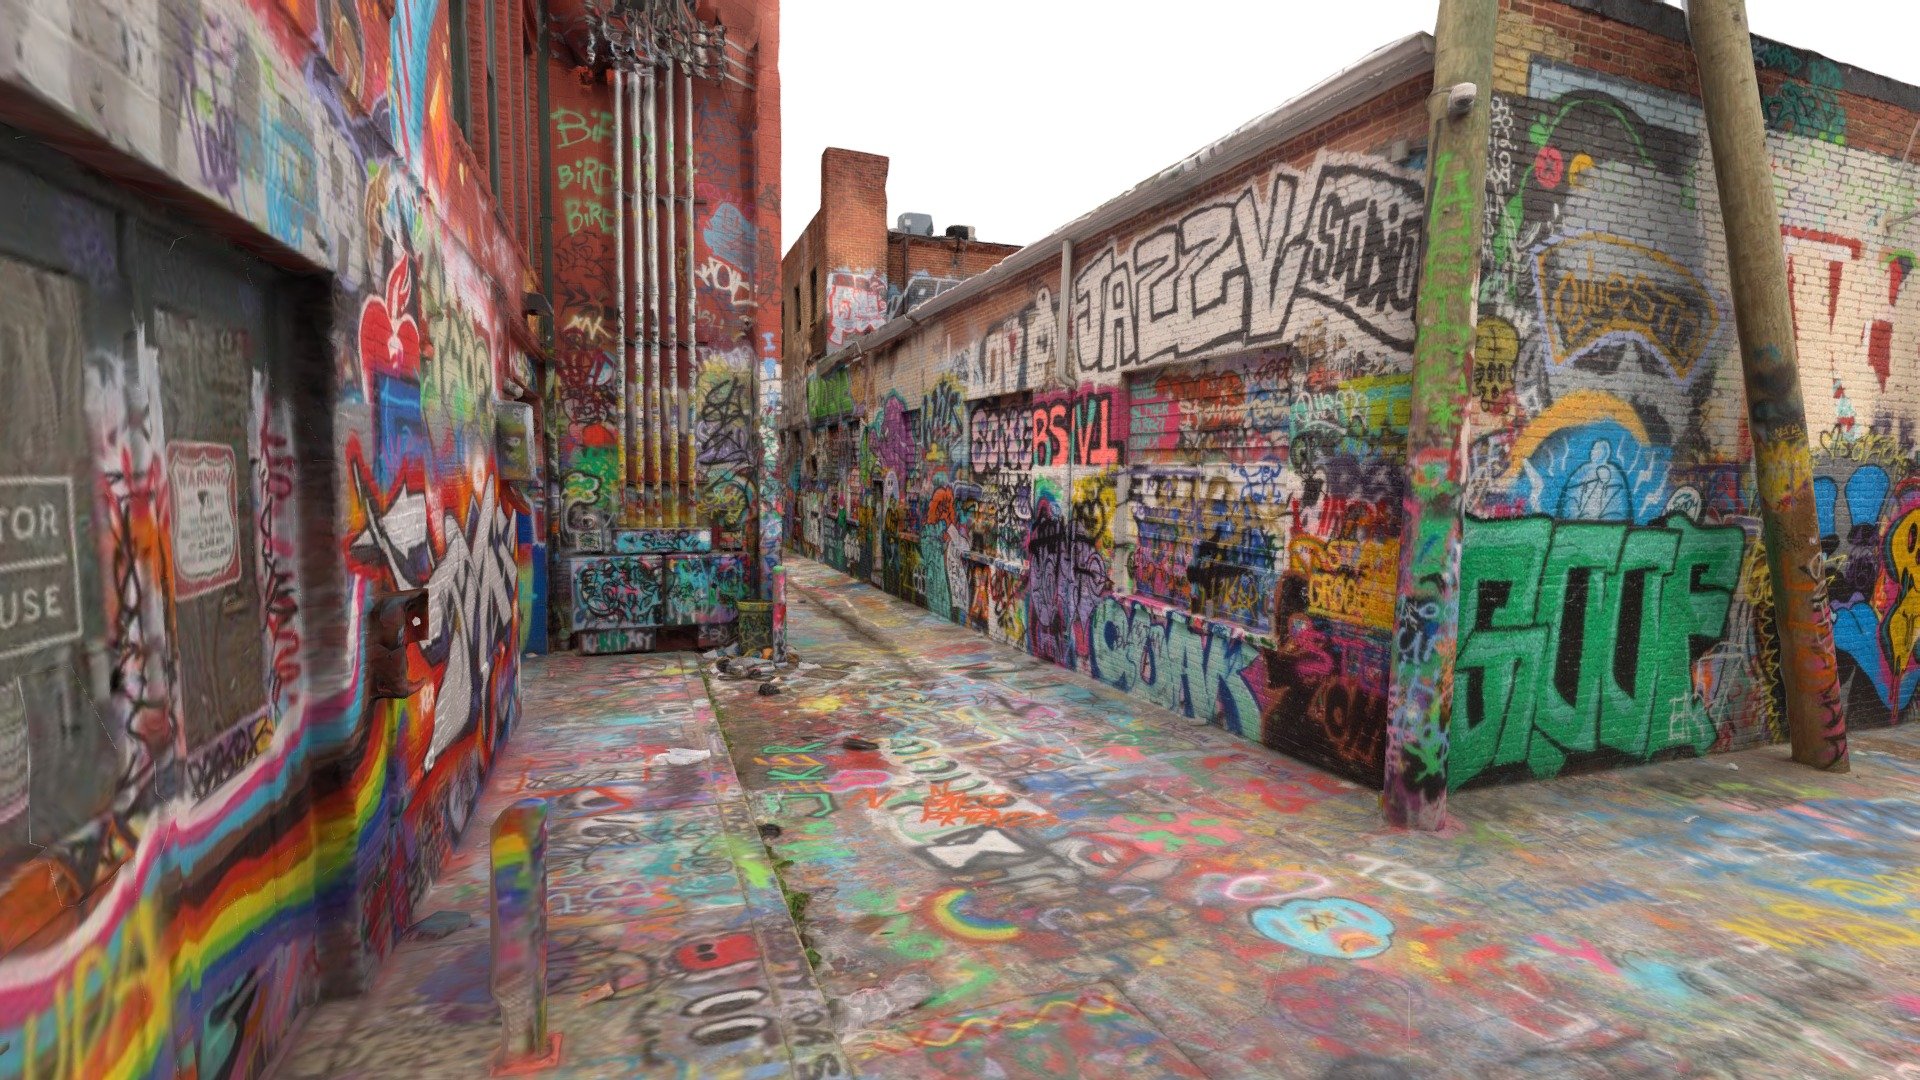 Baltimore's Graffiti Alley is the only spot in Maryland where graffiti is legal. It is always filled with vibrant street art and lots of color! For more information, visit this site.

Created using 1299 images taken with a Nikon D750 + DJI Mavic Mini and processed in Metashape 3d model